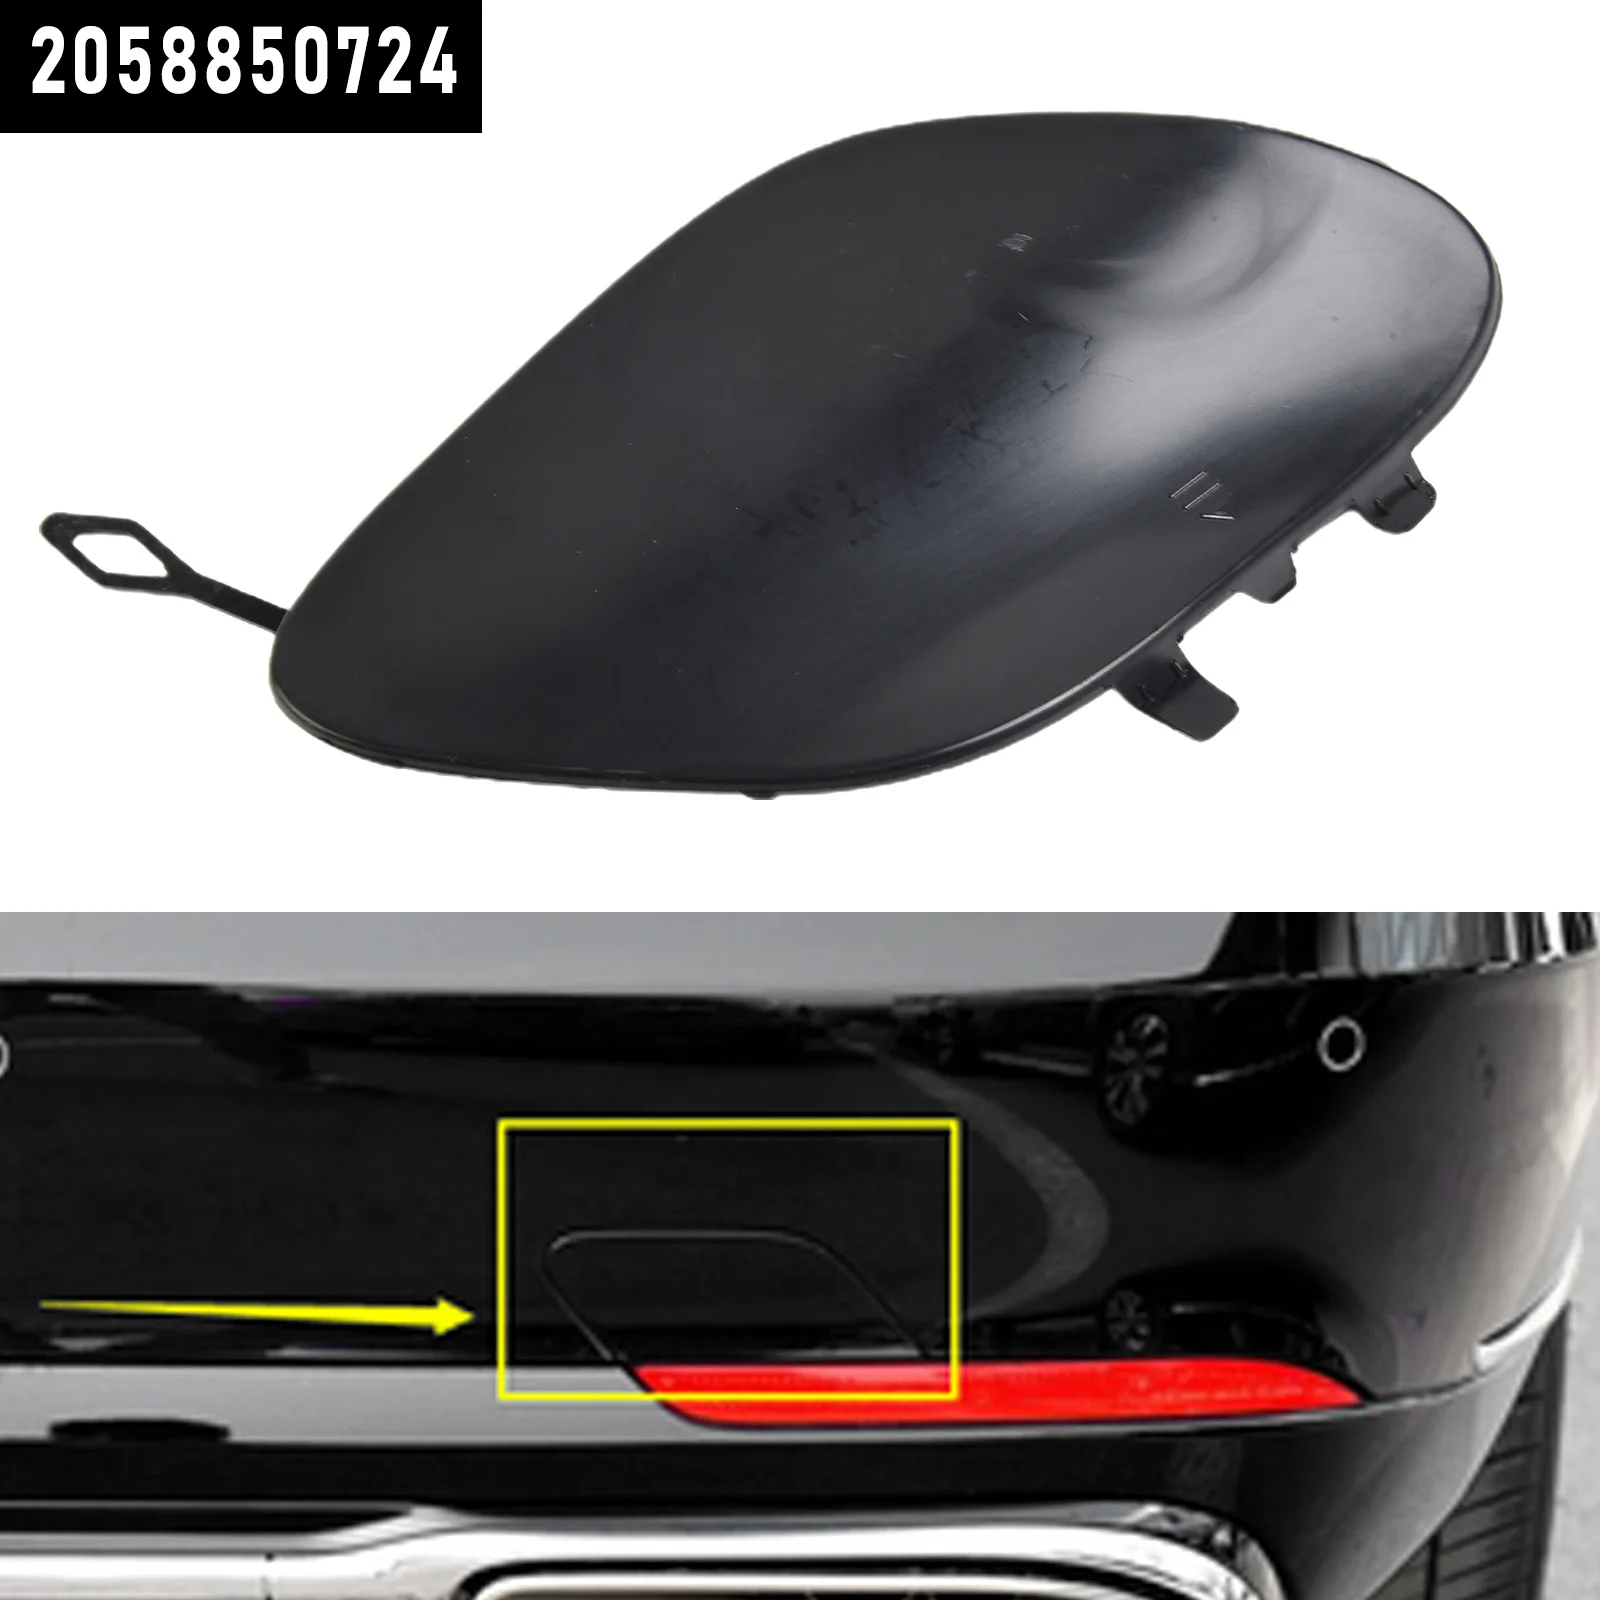 

Brand New Tow Hook Cover Accessories 2058850724 A2058850724 For Mercedes 2015-2016 Front Bumper Tow Hook Cover